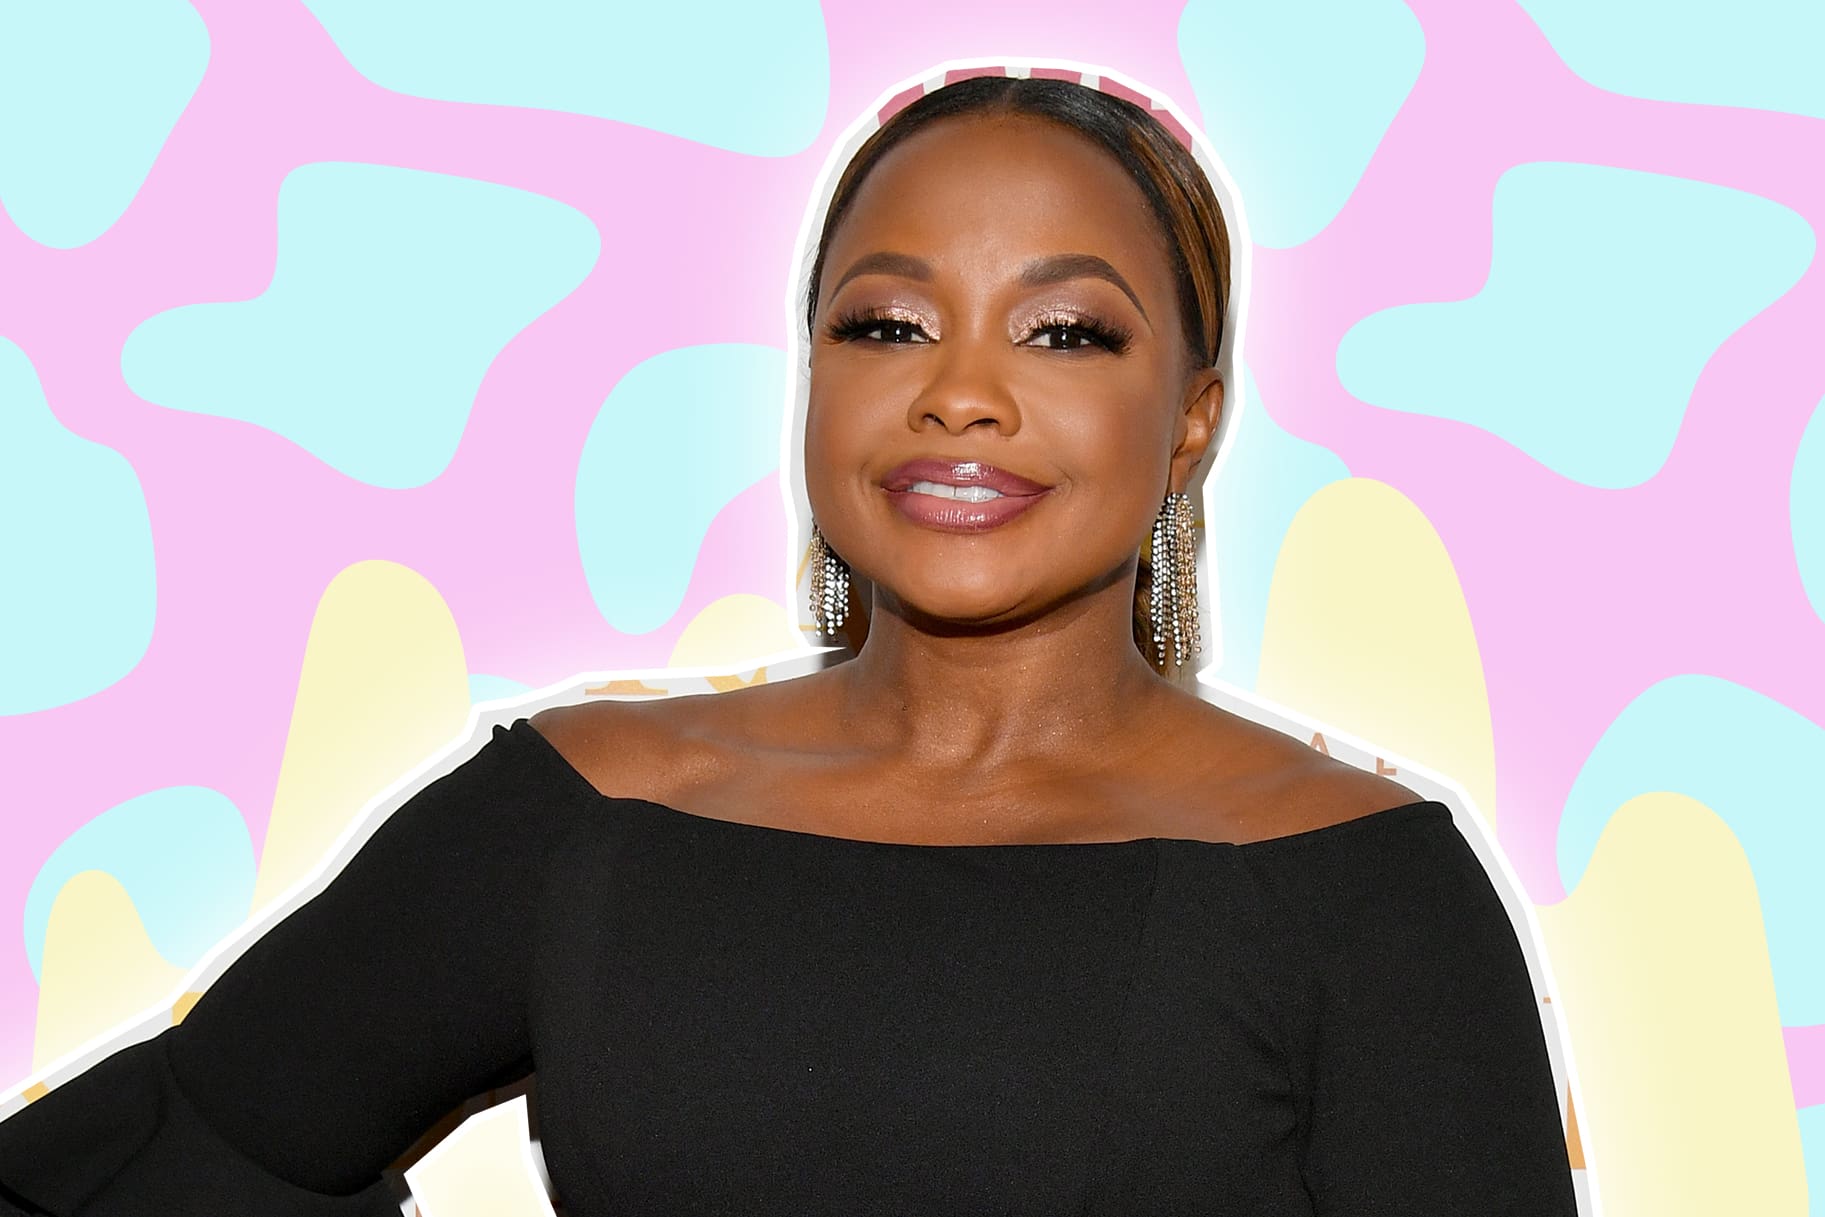 Phaedra Parks' Fans Love To Watch Her 'Marriage Boot Camp'